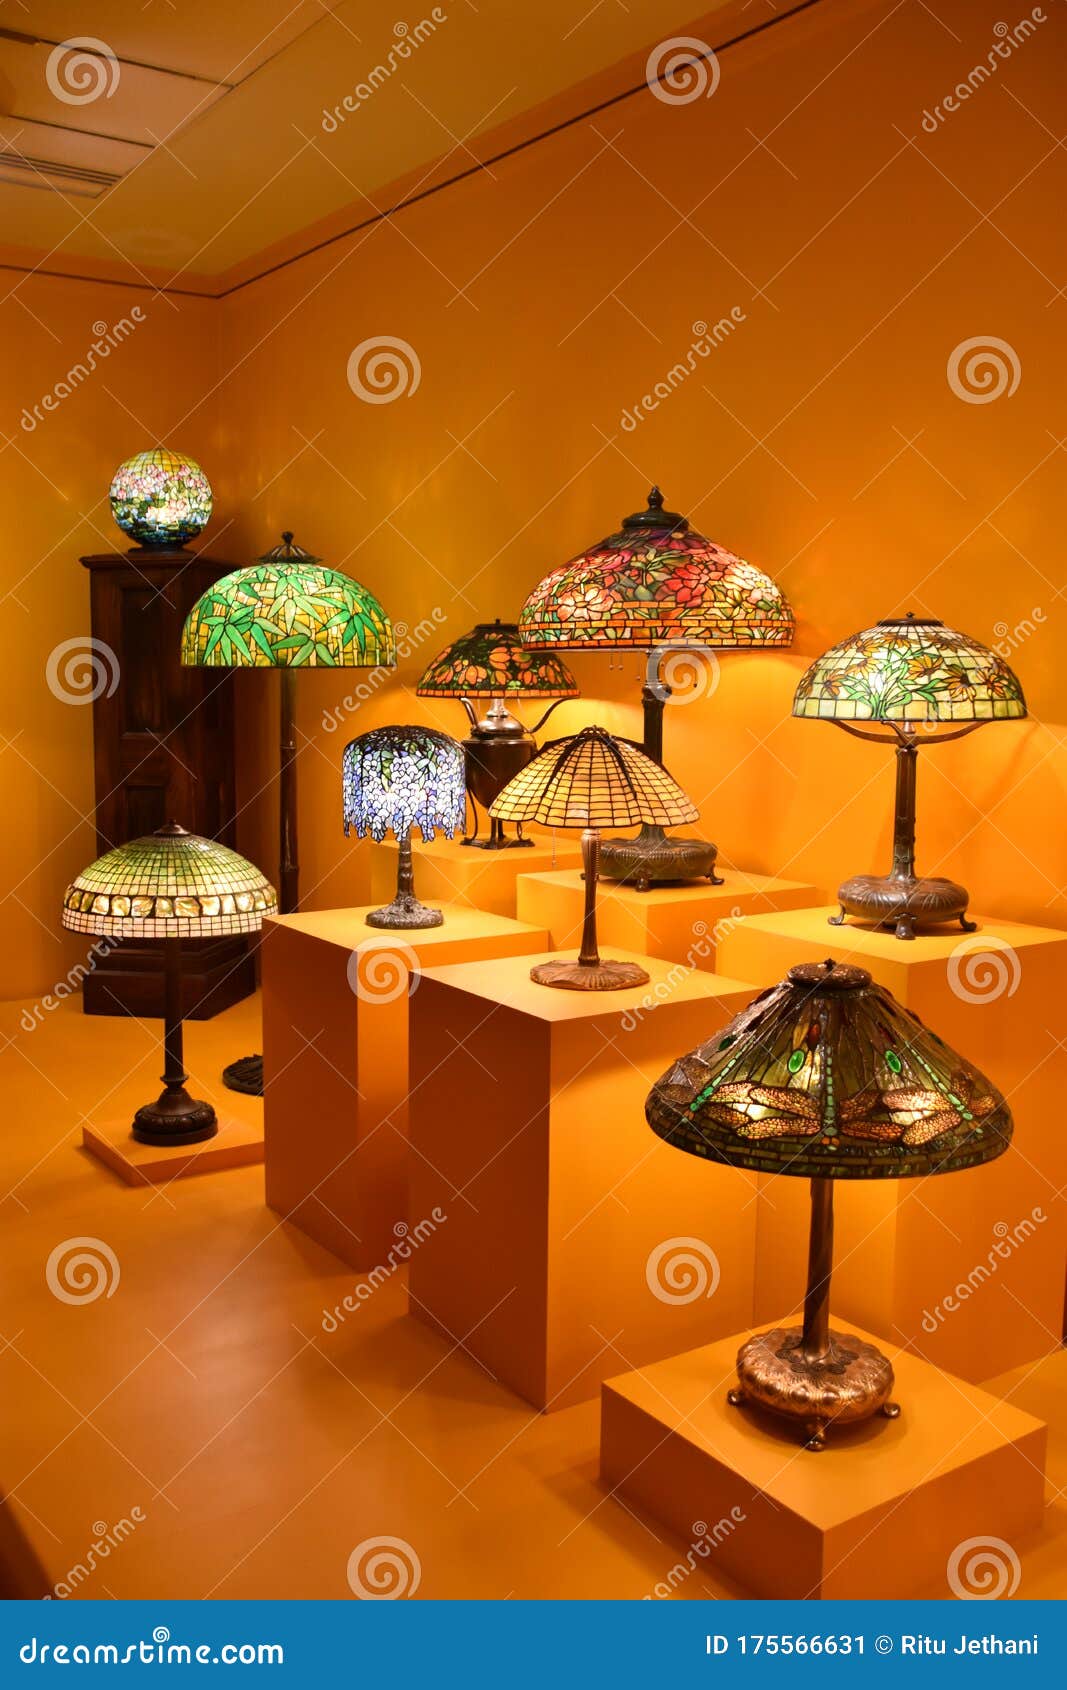 Designed by Louis C. Tiffany, Lamp, American